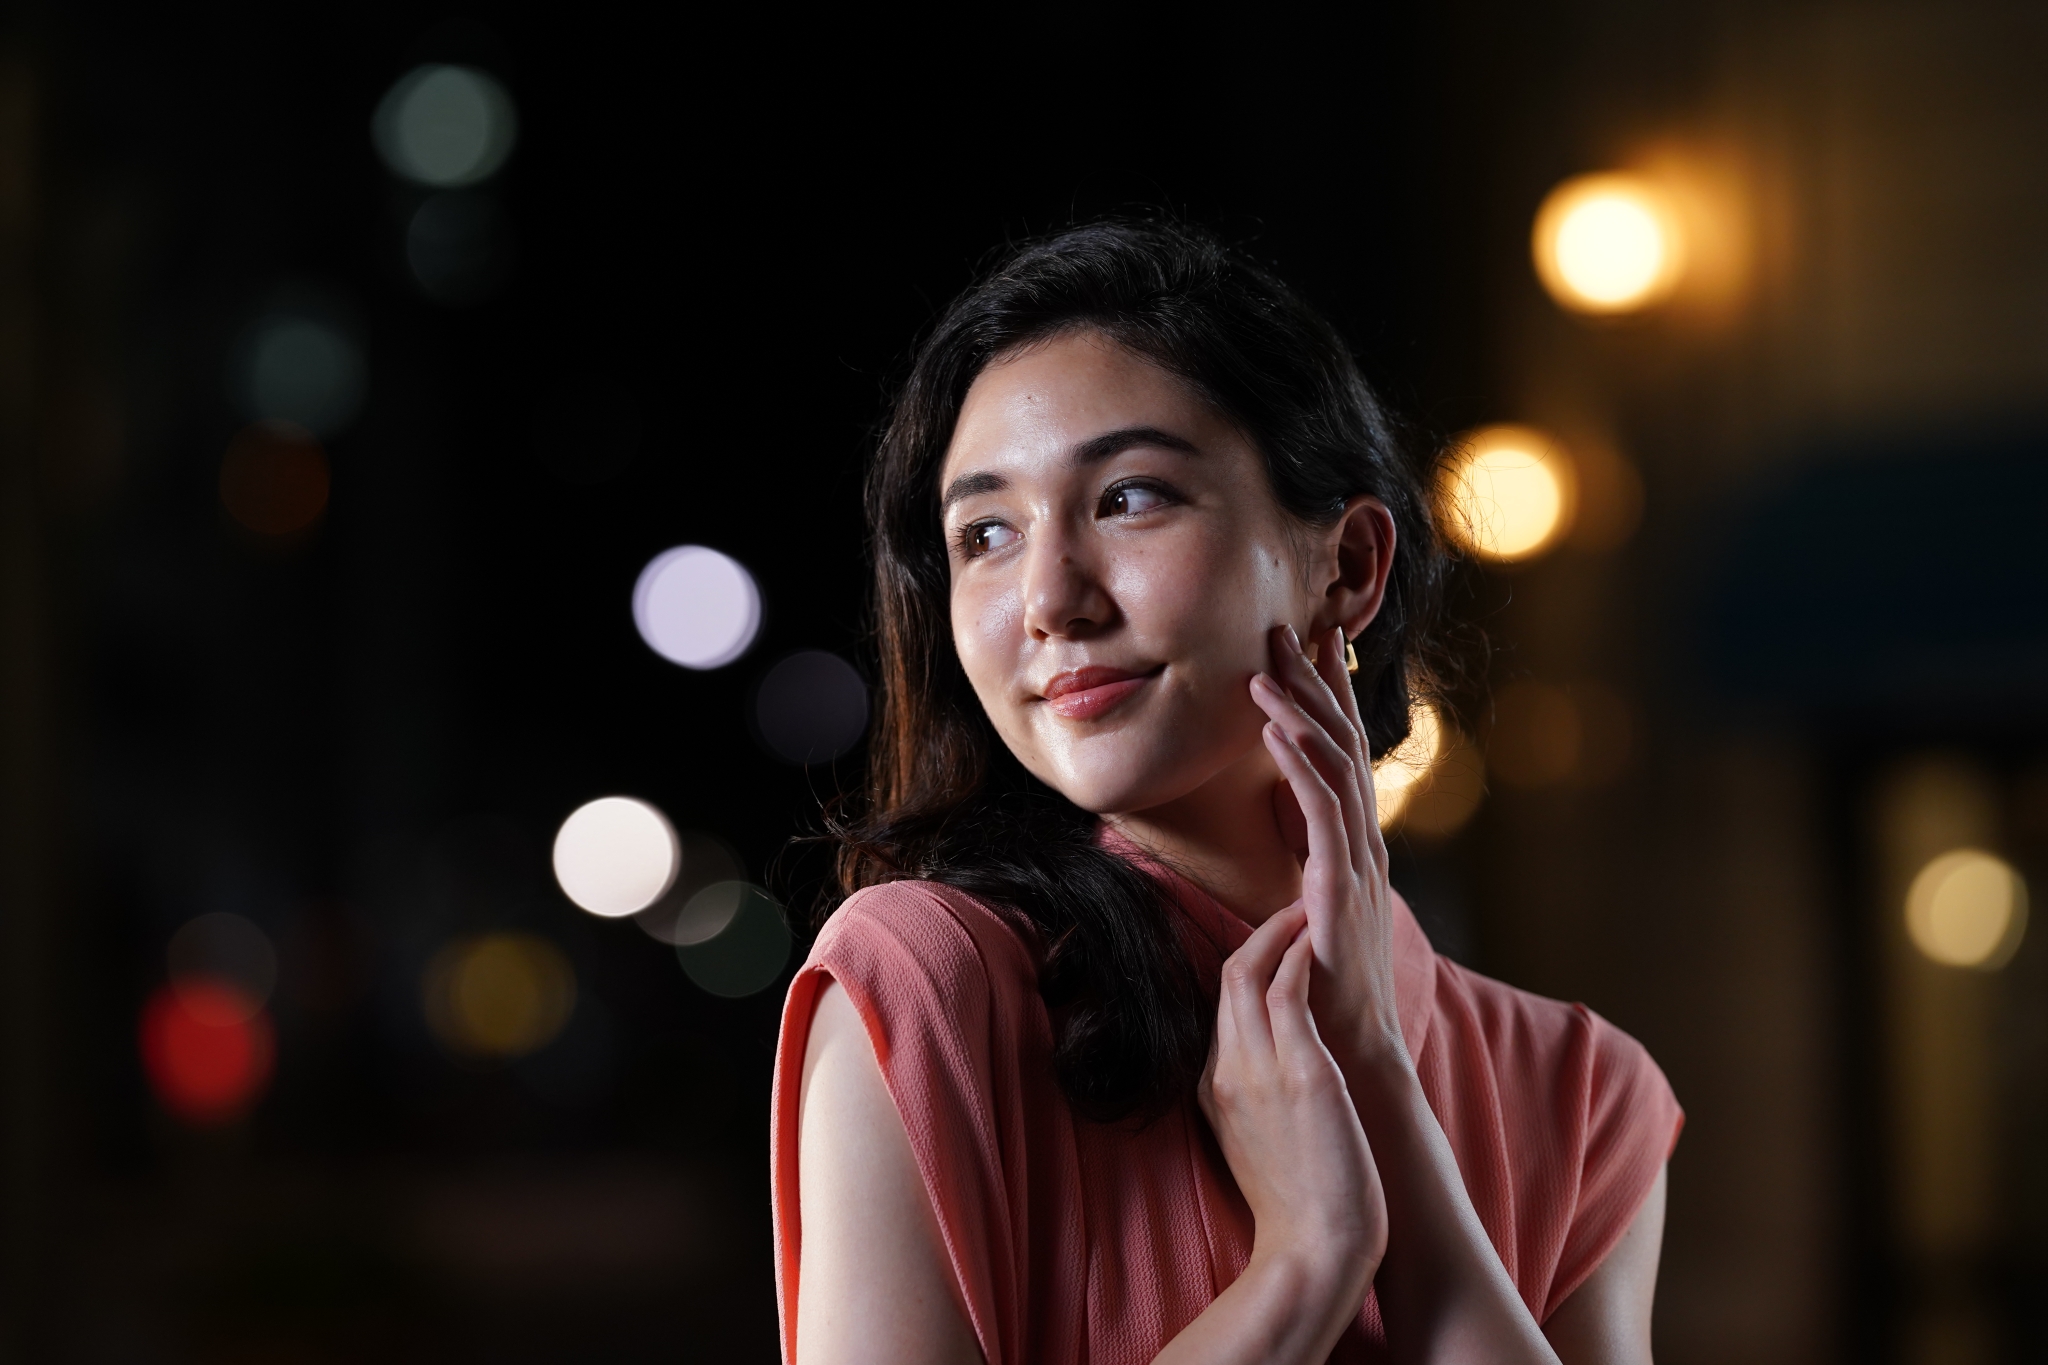 Female model at night-time with streetlights in bokeh background